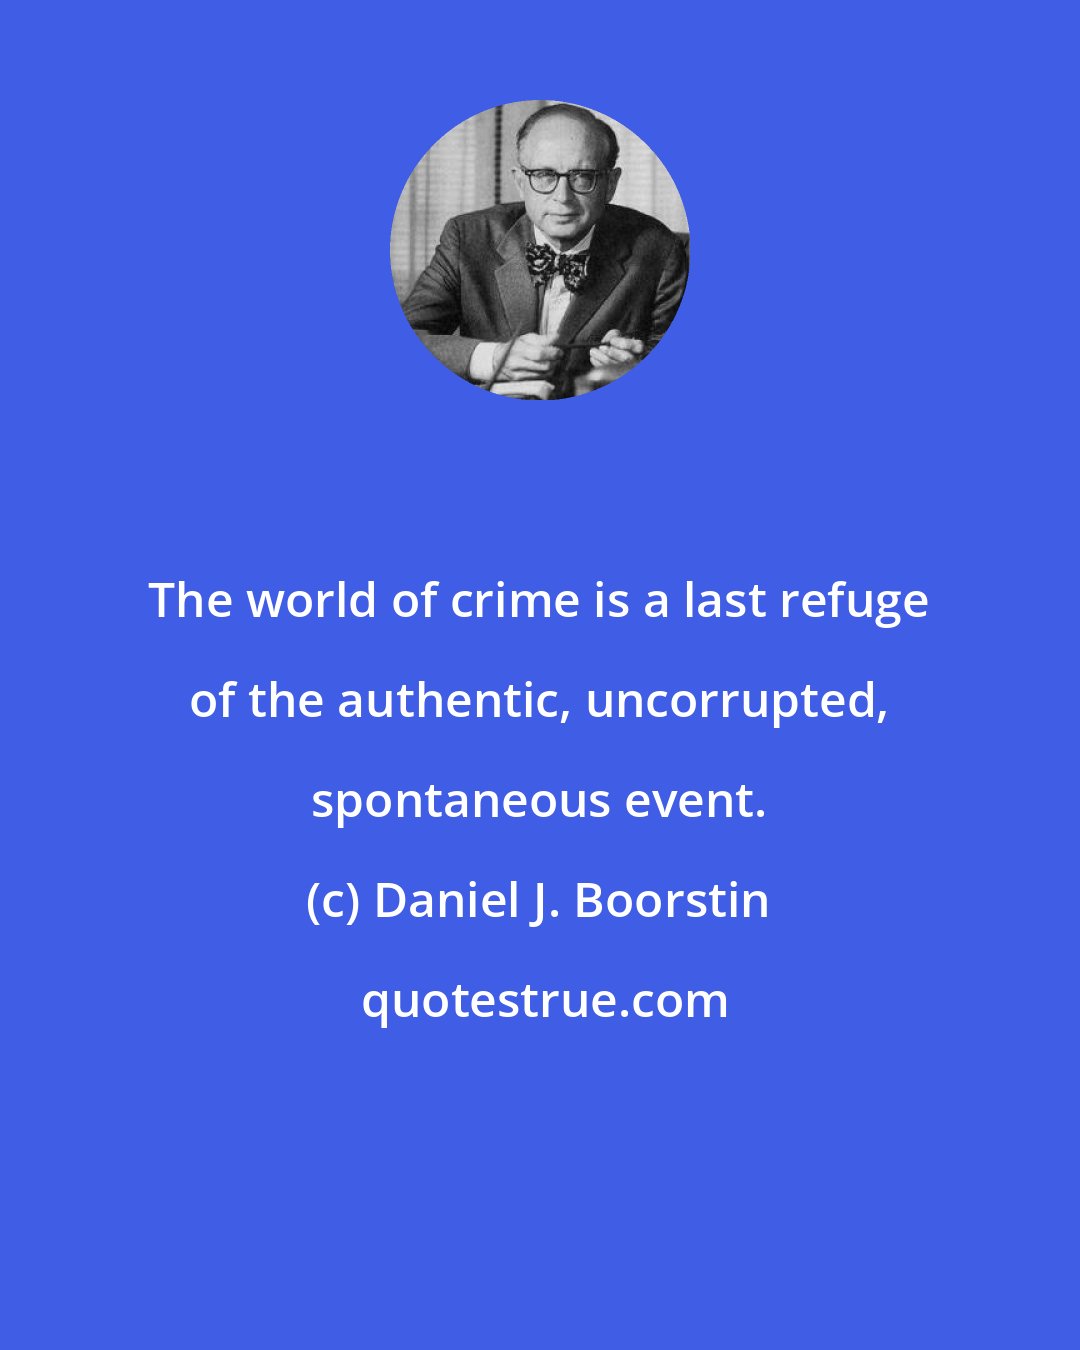 Daniel J. Boorstin: The world of crime is a last refuge of the authentic, uncorrupted, spontaneous event.